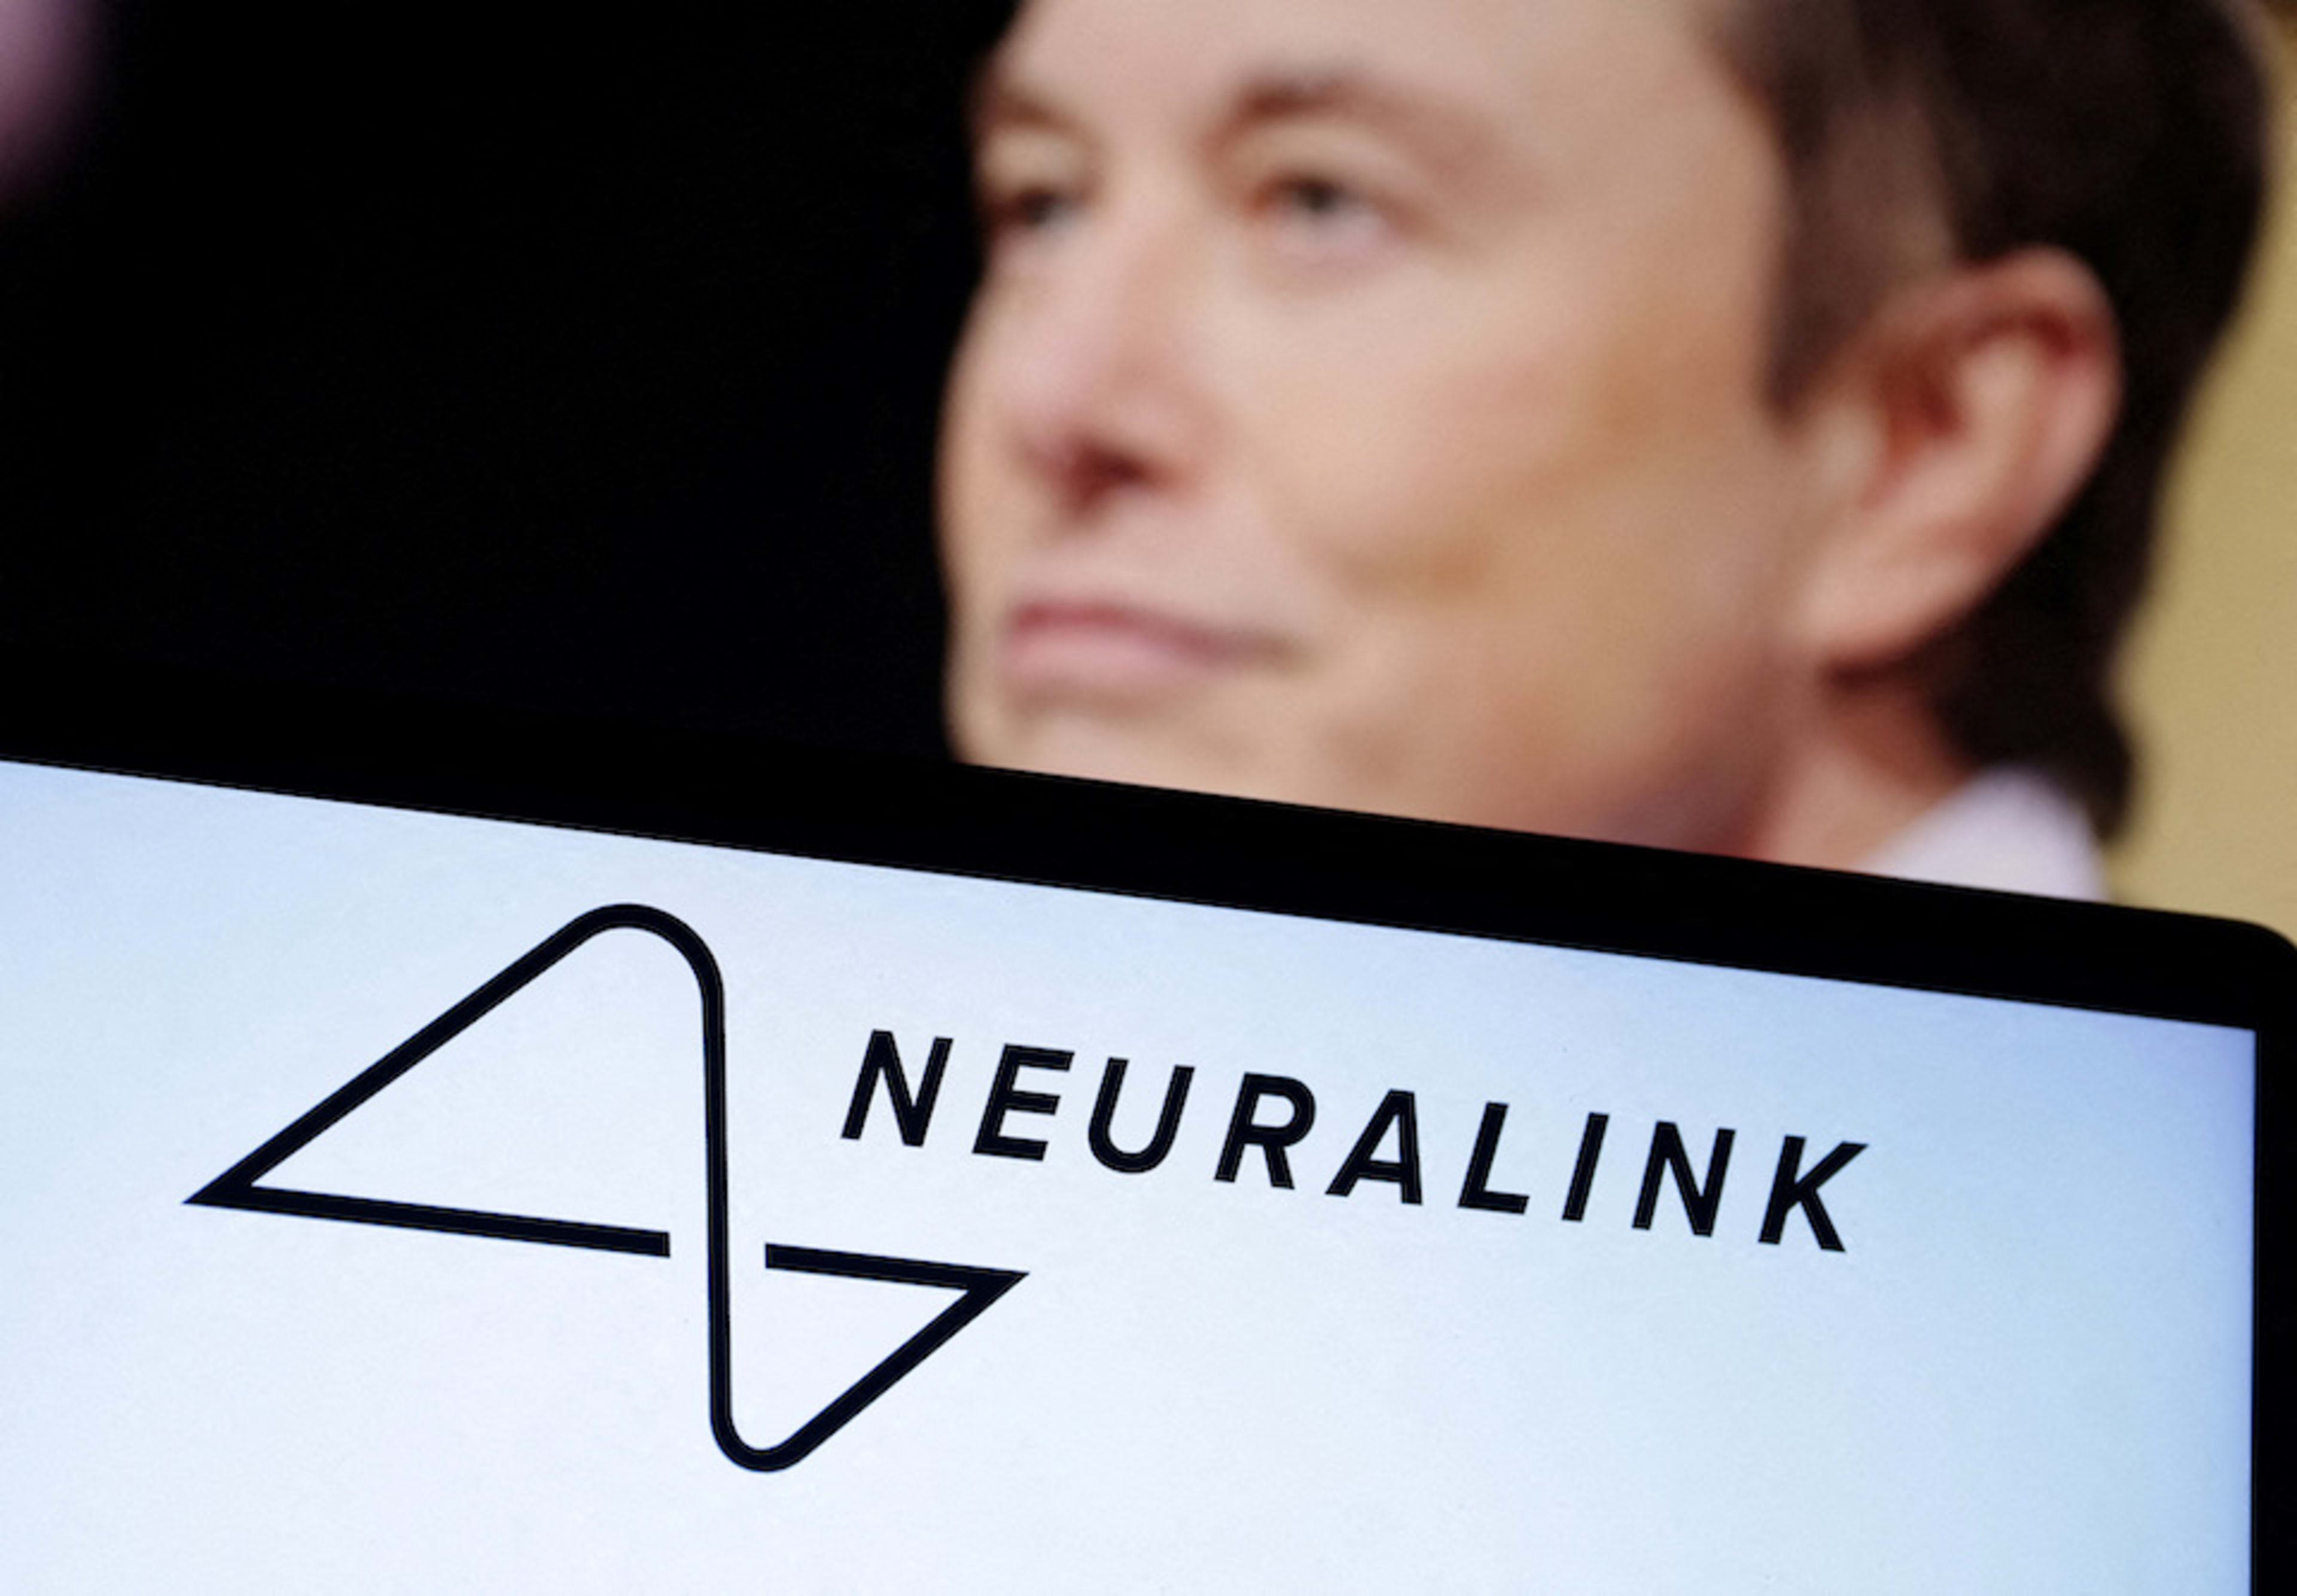 Brain-chip startup Neuralink gives implant to first human patient, says Elon Musk